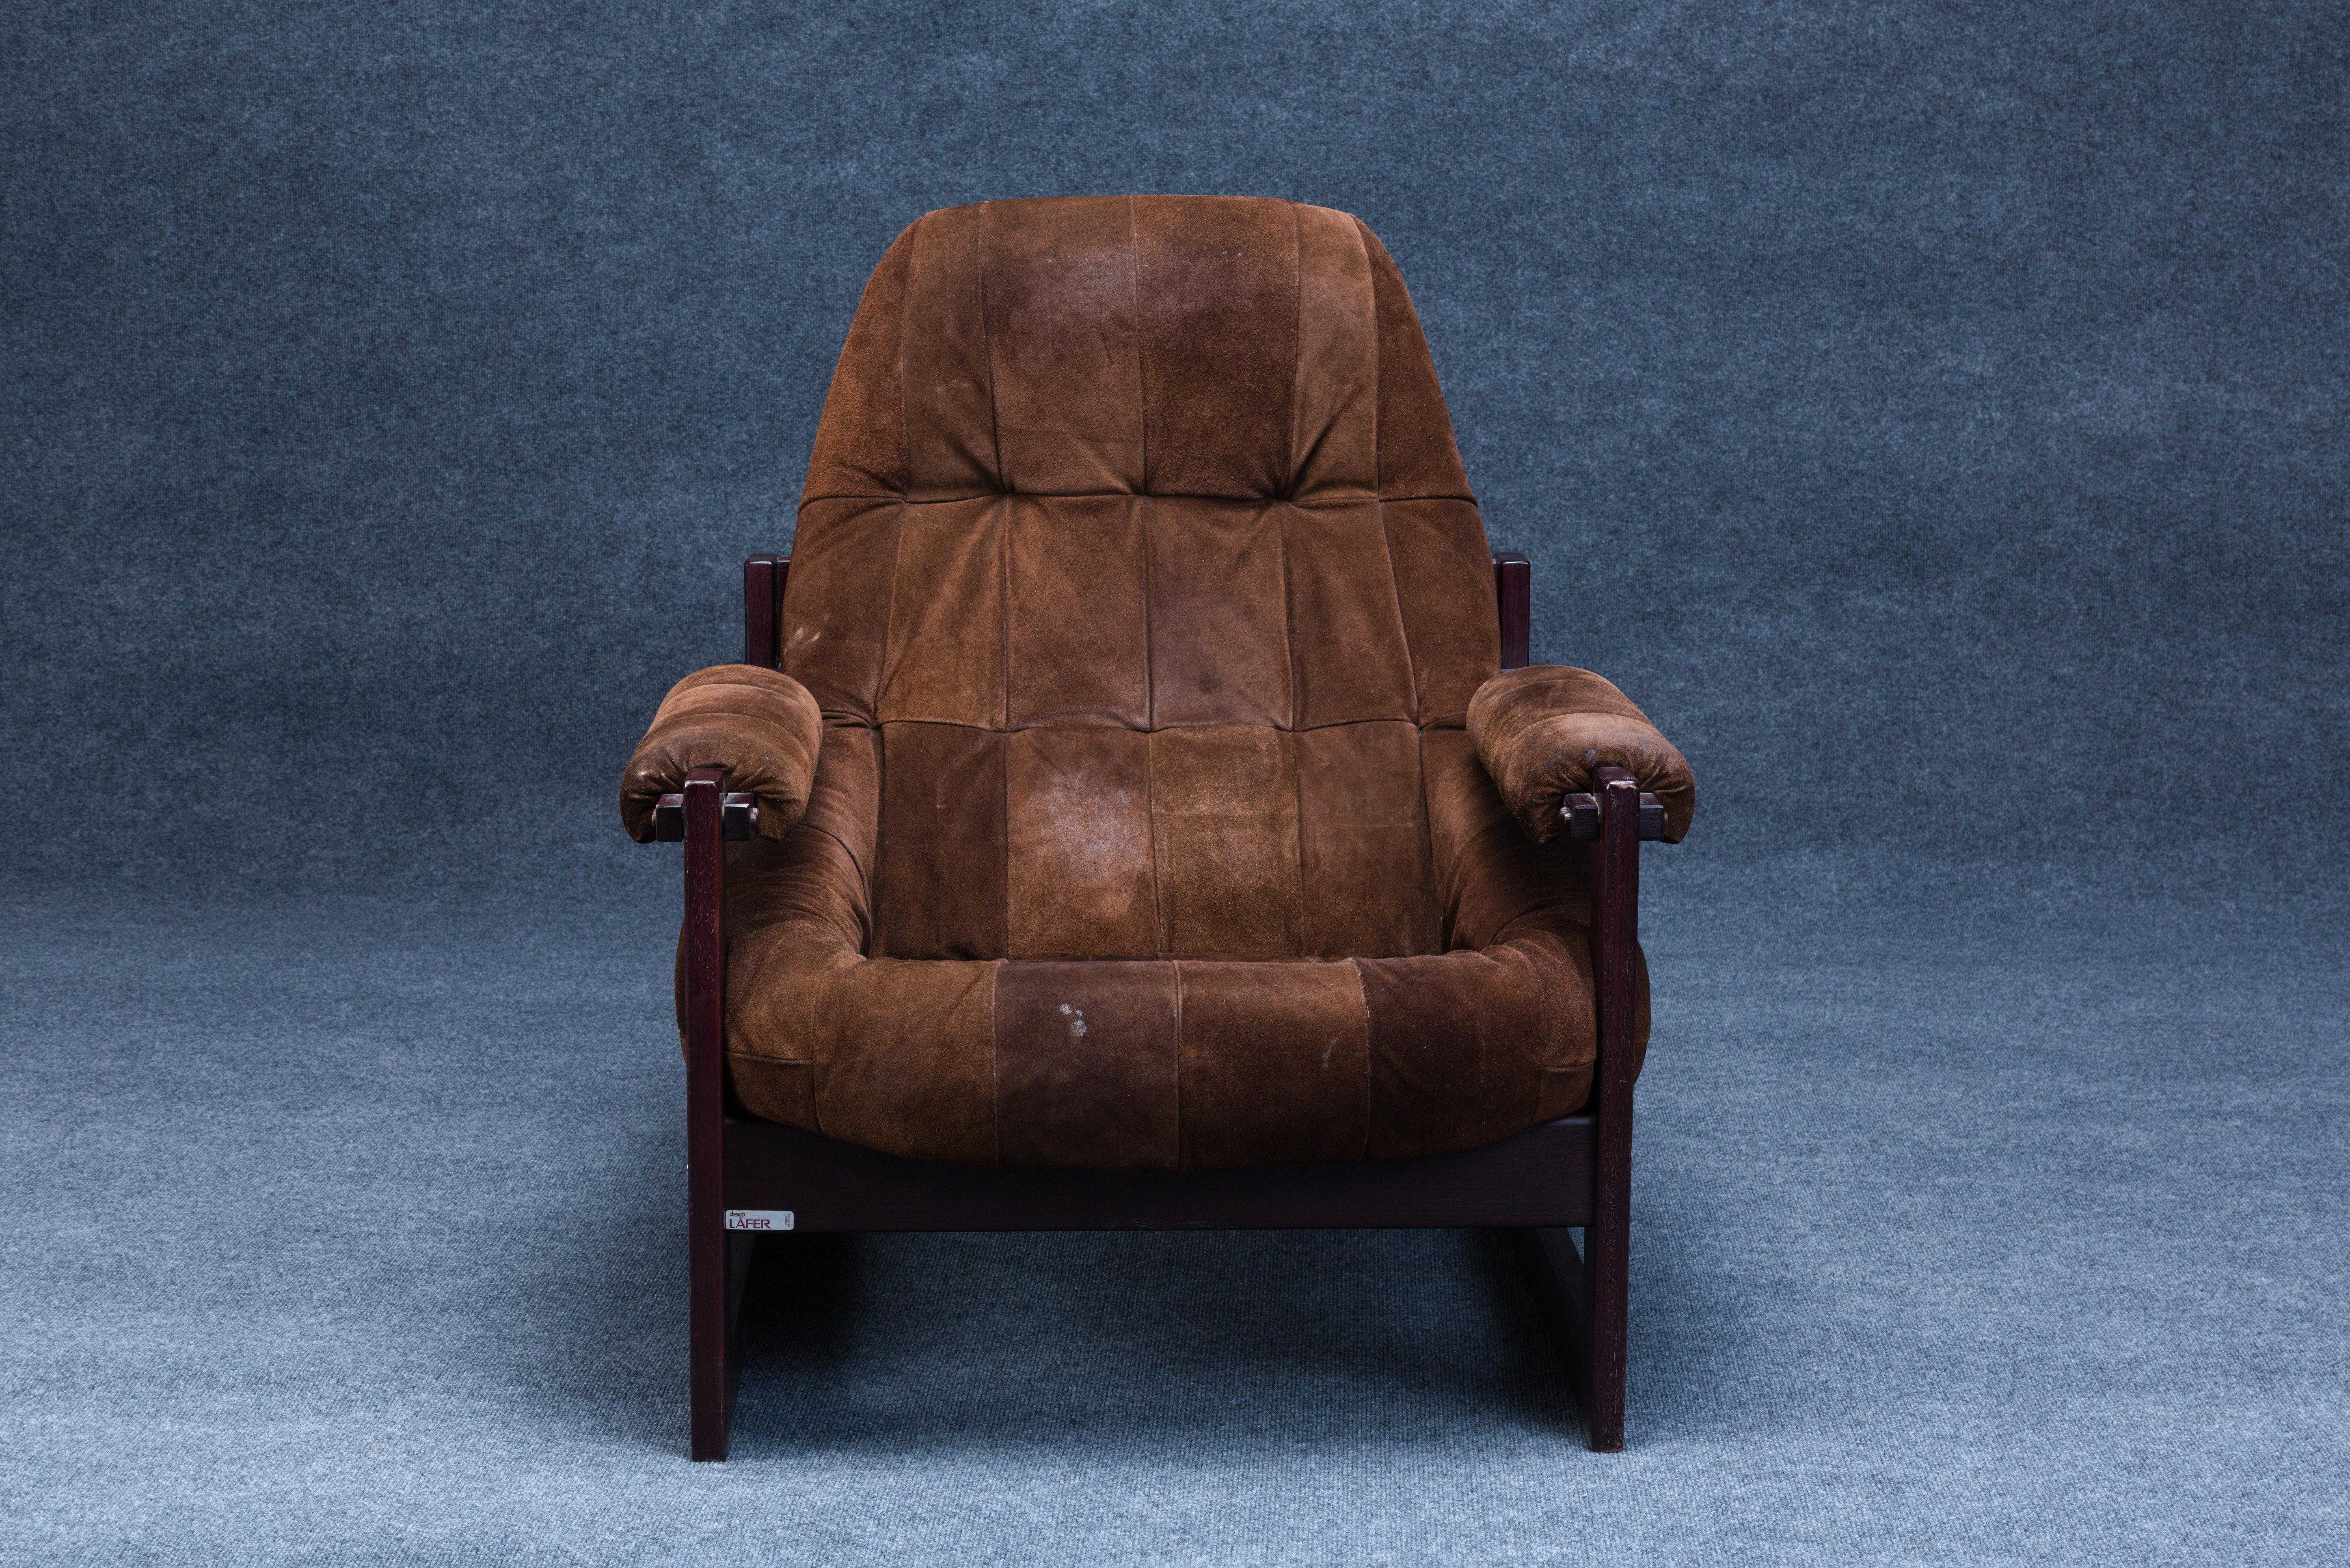 Brazilian Mid-Century Modern Armchair/Ottoman by Percival Lafer in Suede Leather For Sale 2